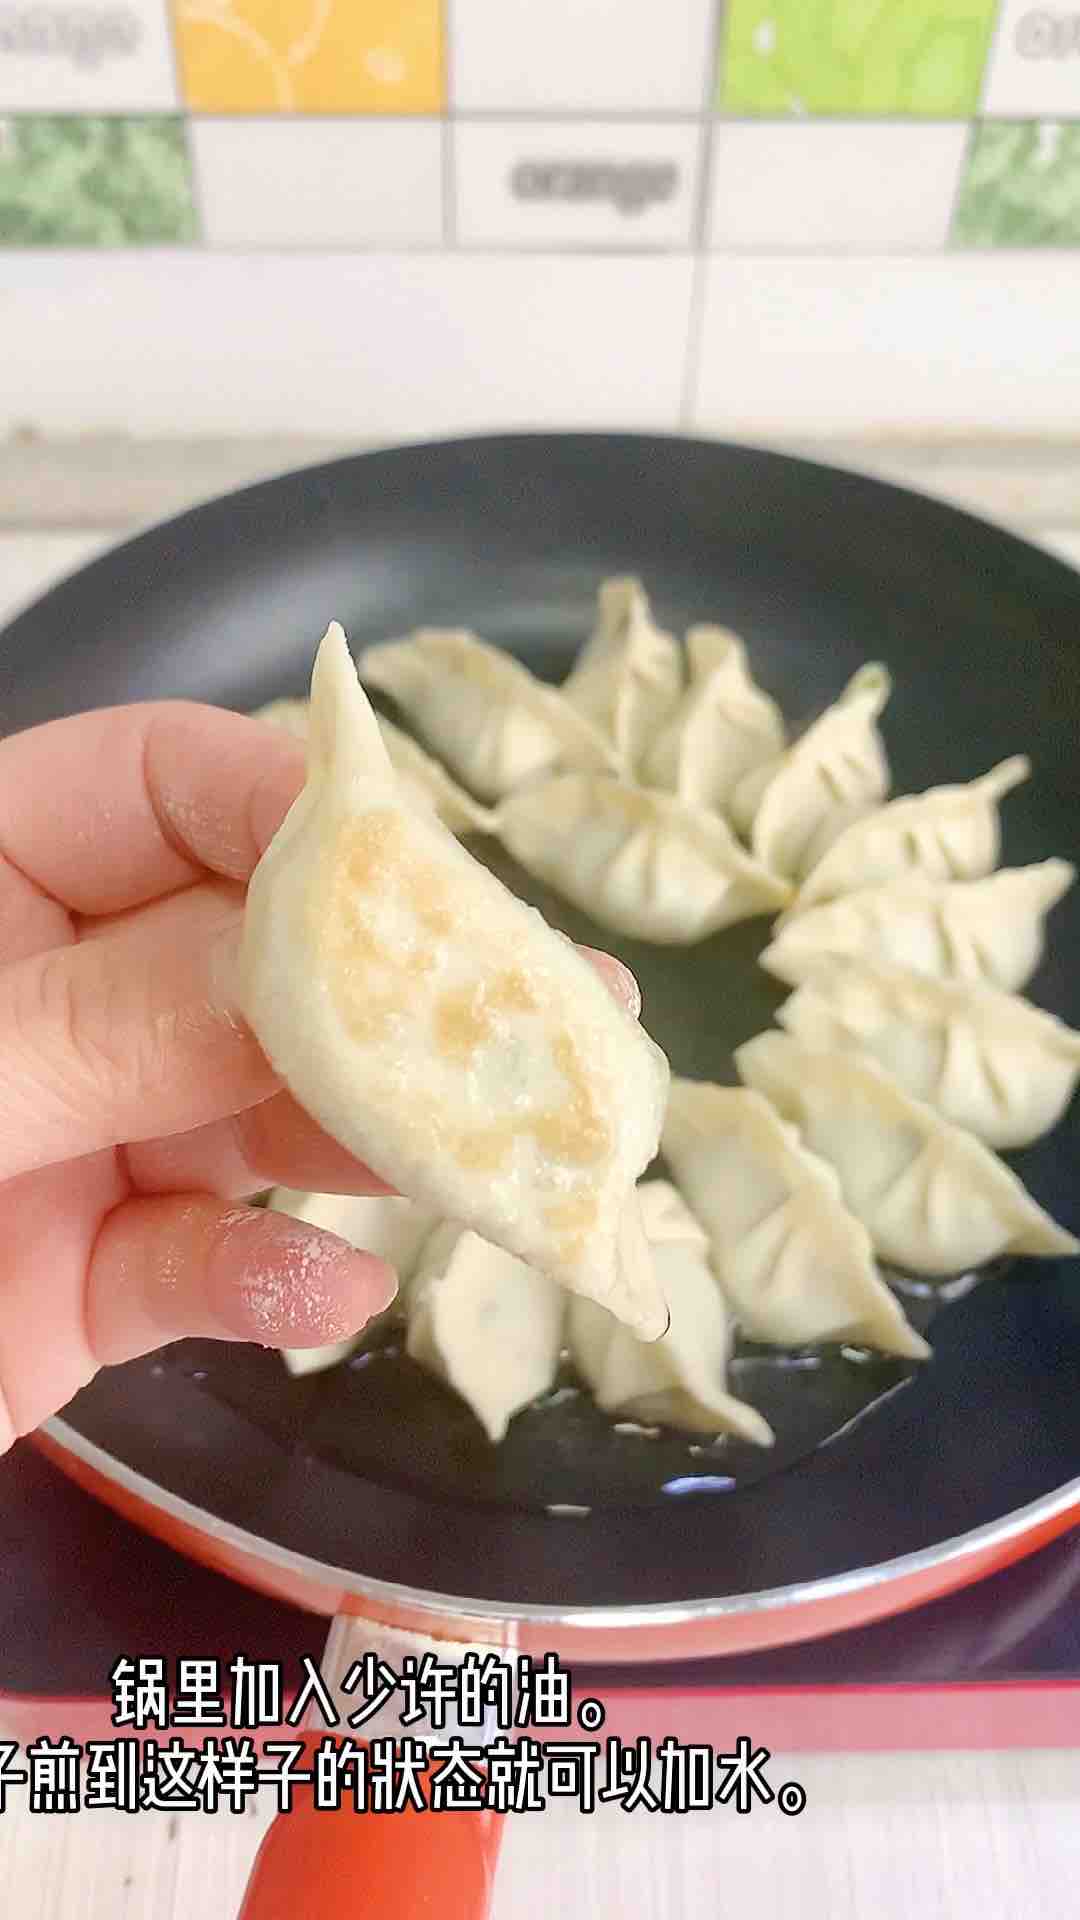 The Winter Solstice is As Big As The Year. Winter Solstice Dumplings are Tender and Fresh Boiled, Crisp and Fragrant recipe